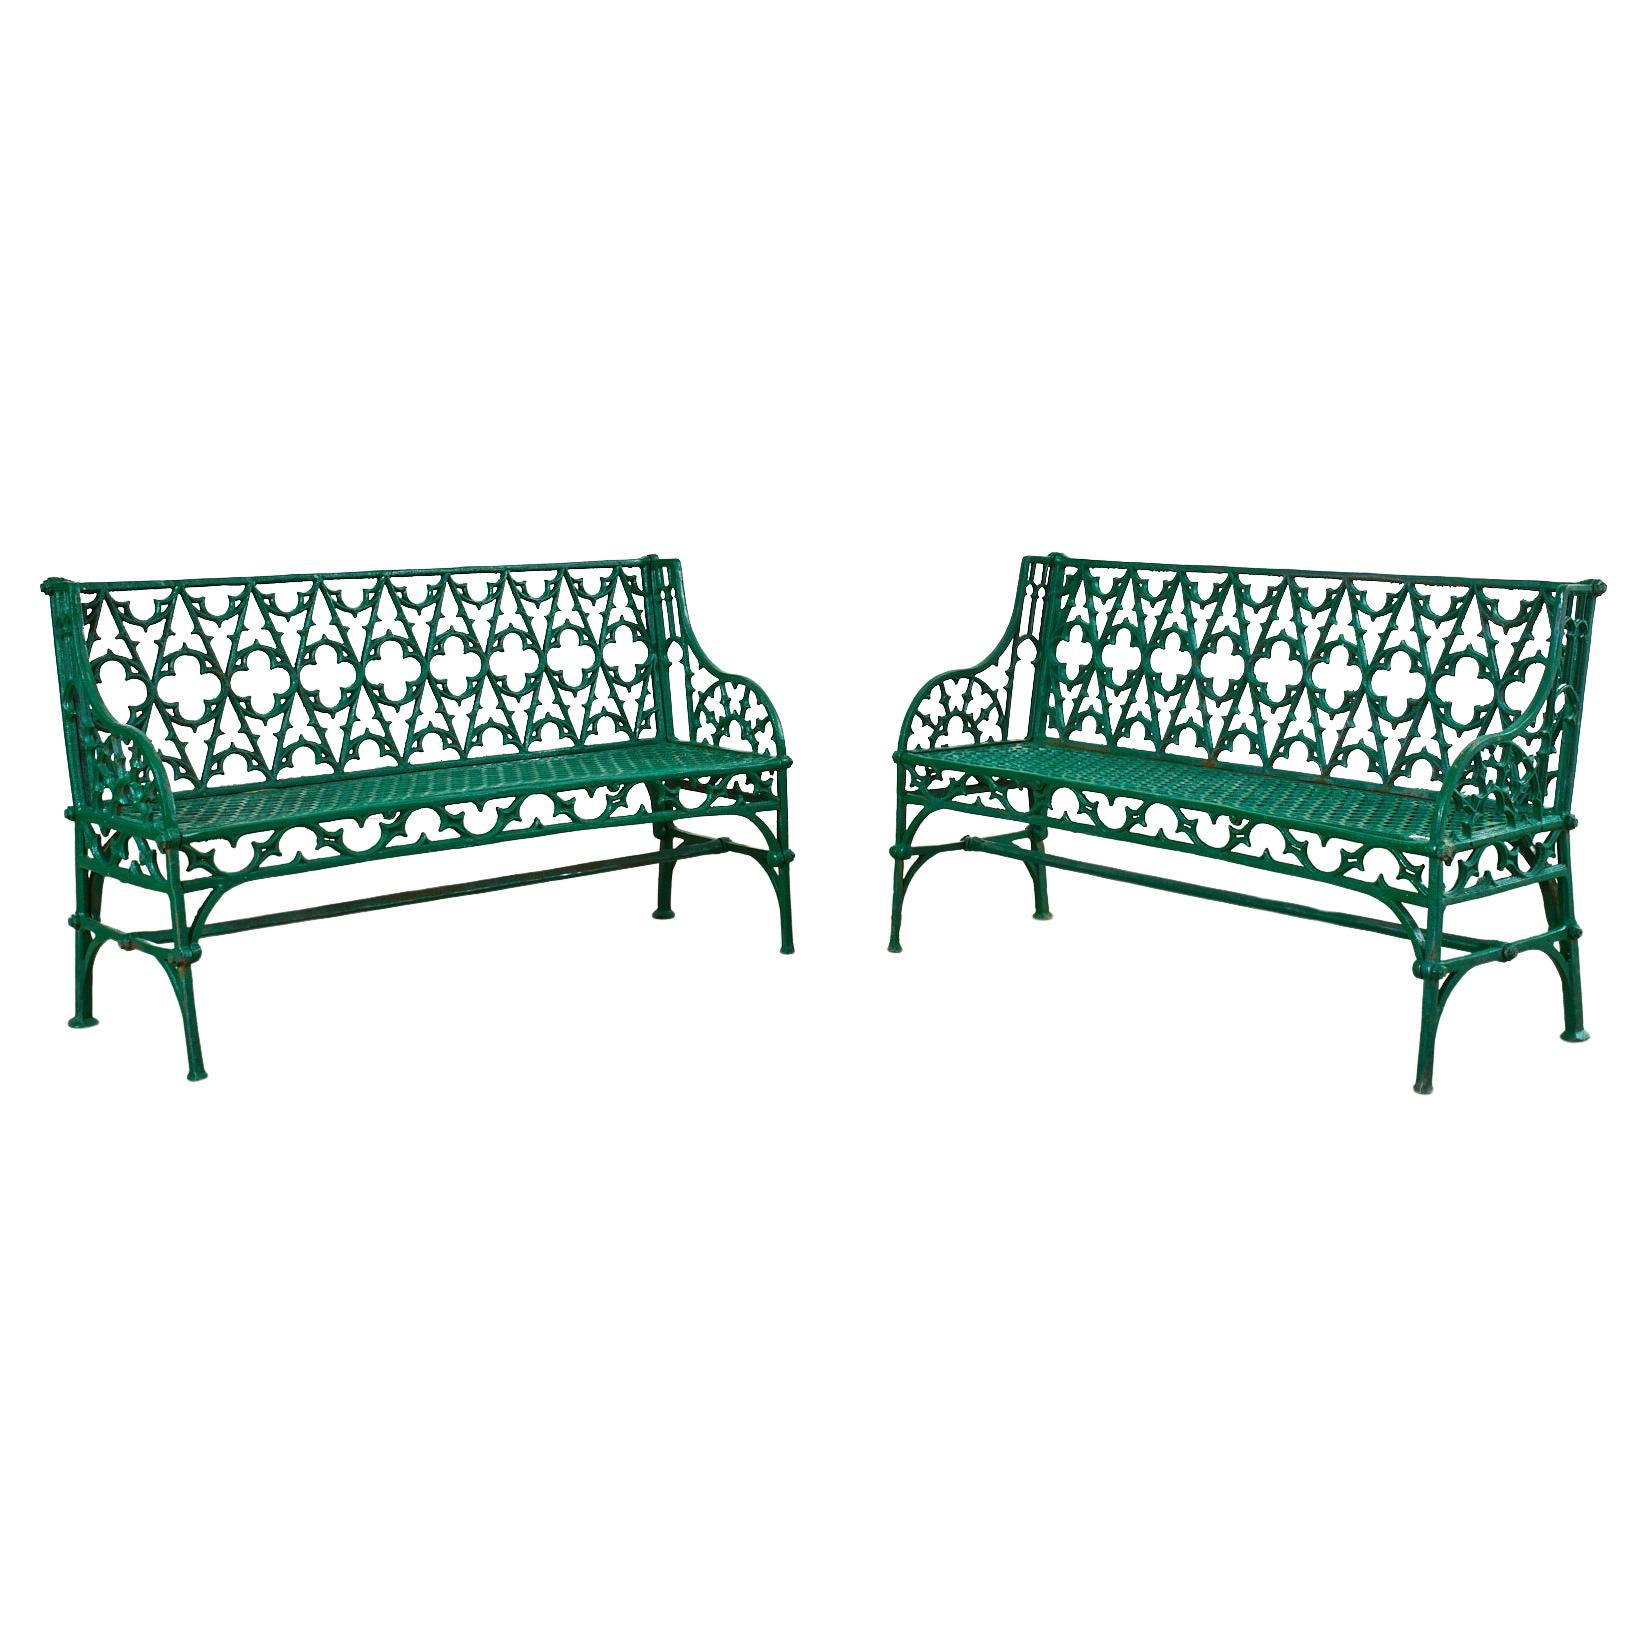 Pair of English Coalbrookdale Attributed Iron Gothic Garden Benches